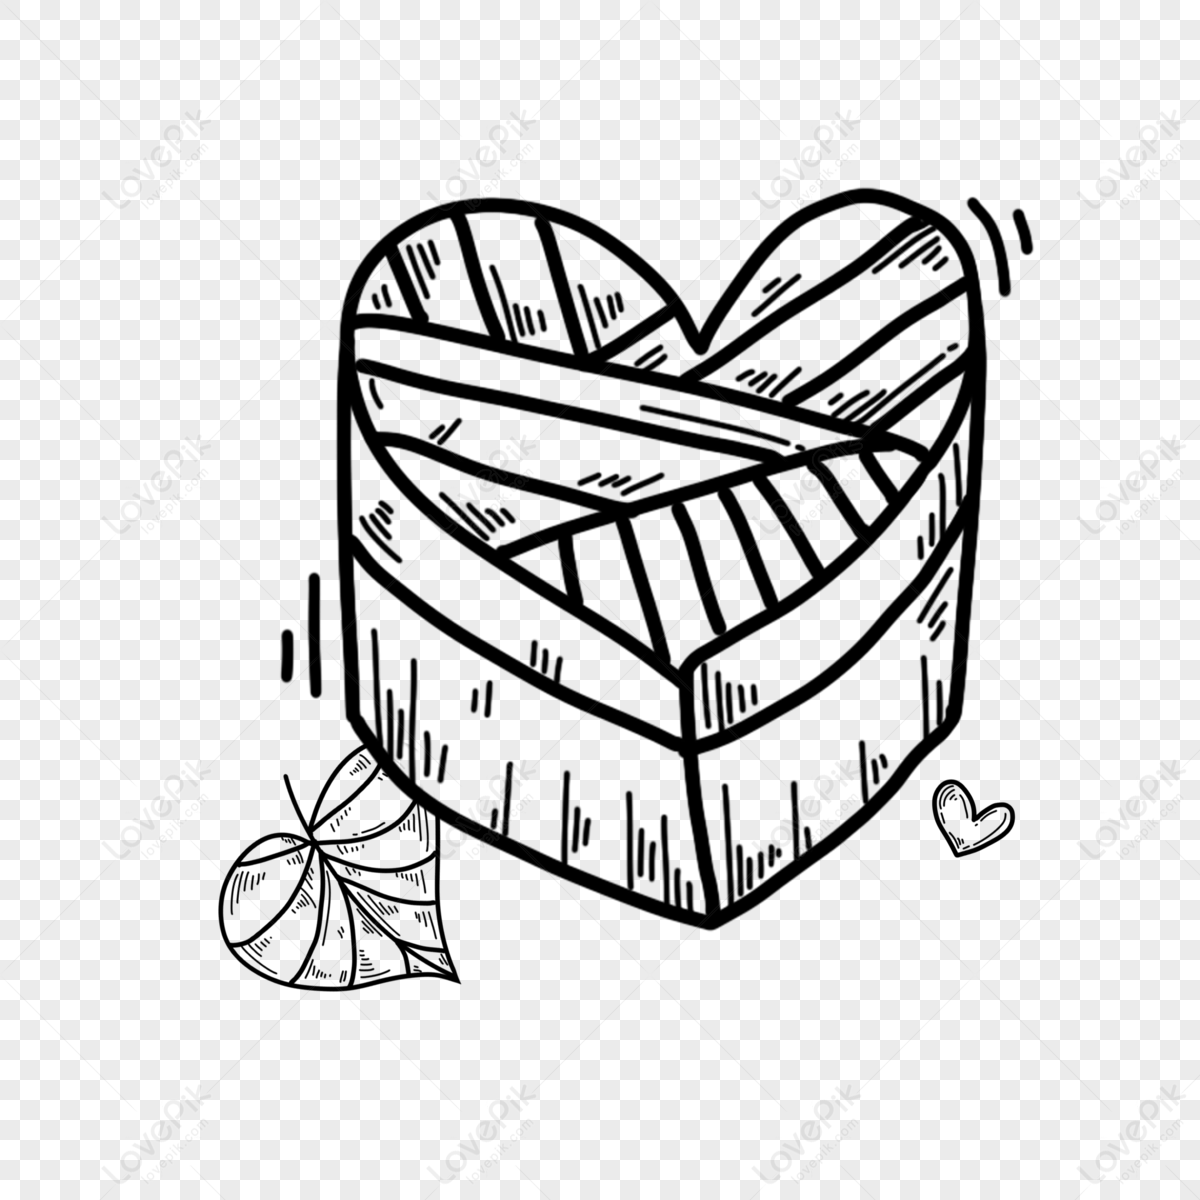 Coloring Pages Of Animals In A Box Of Presents Outline Sketch Drawing  Vector, Gifts Drawing, Gifts Outline, Gifts Sketch PNG and Vector with  Transparent Background for Free Download